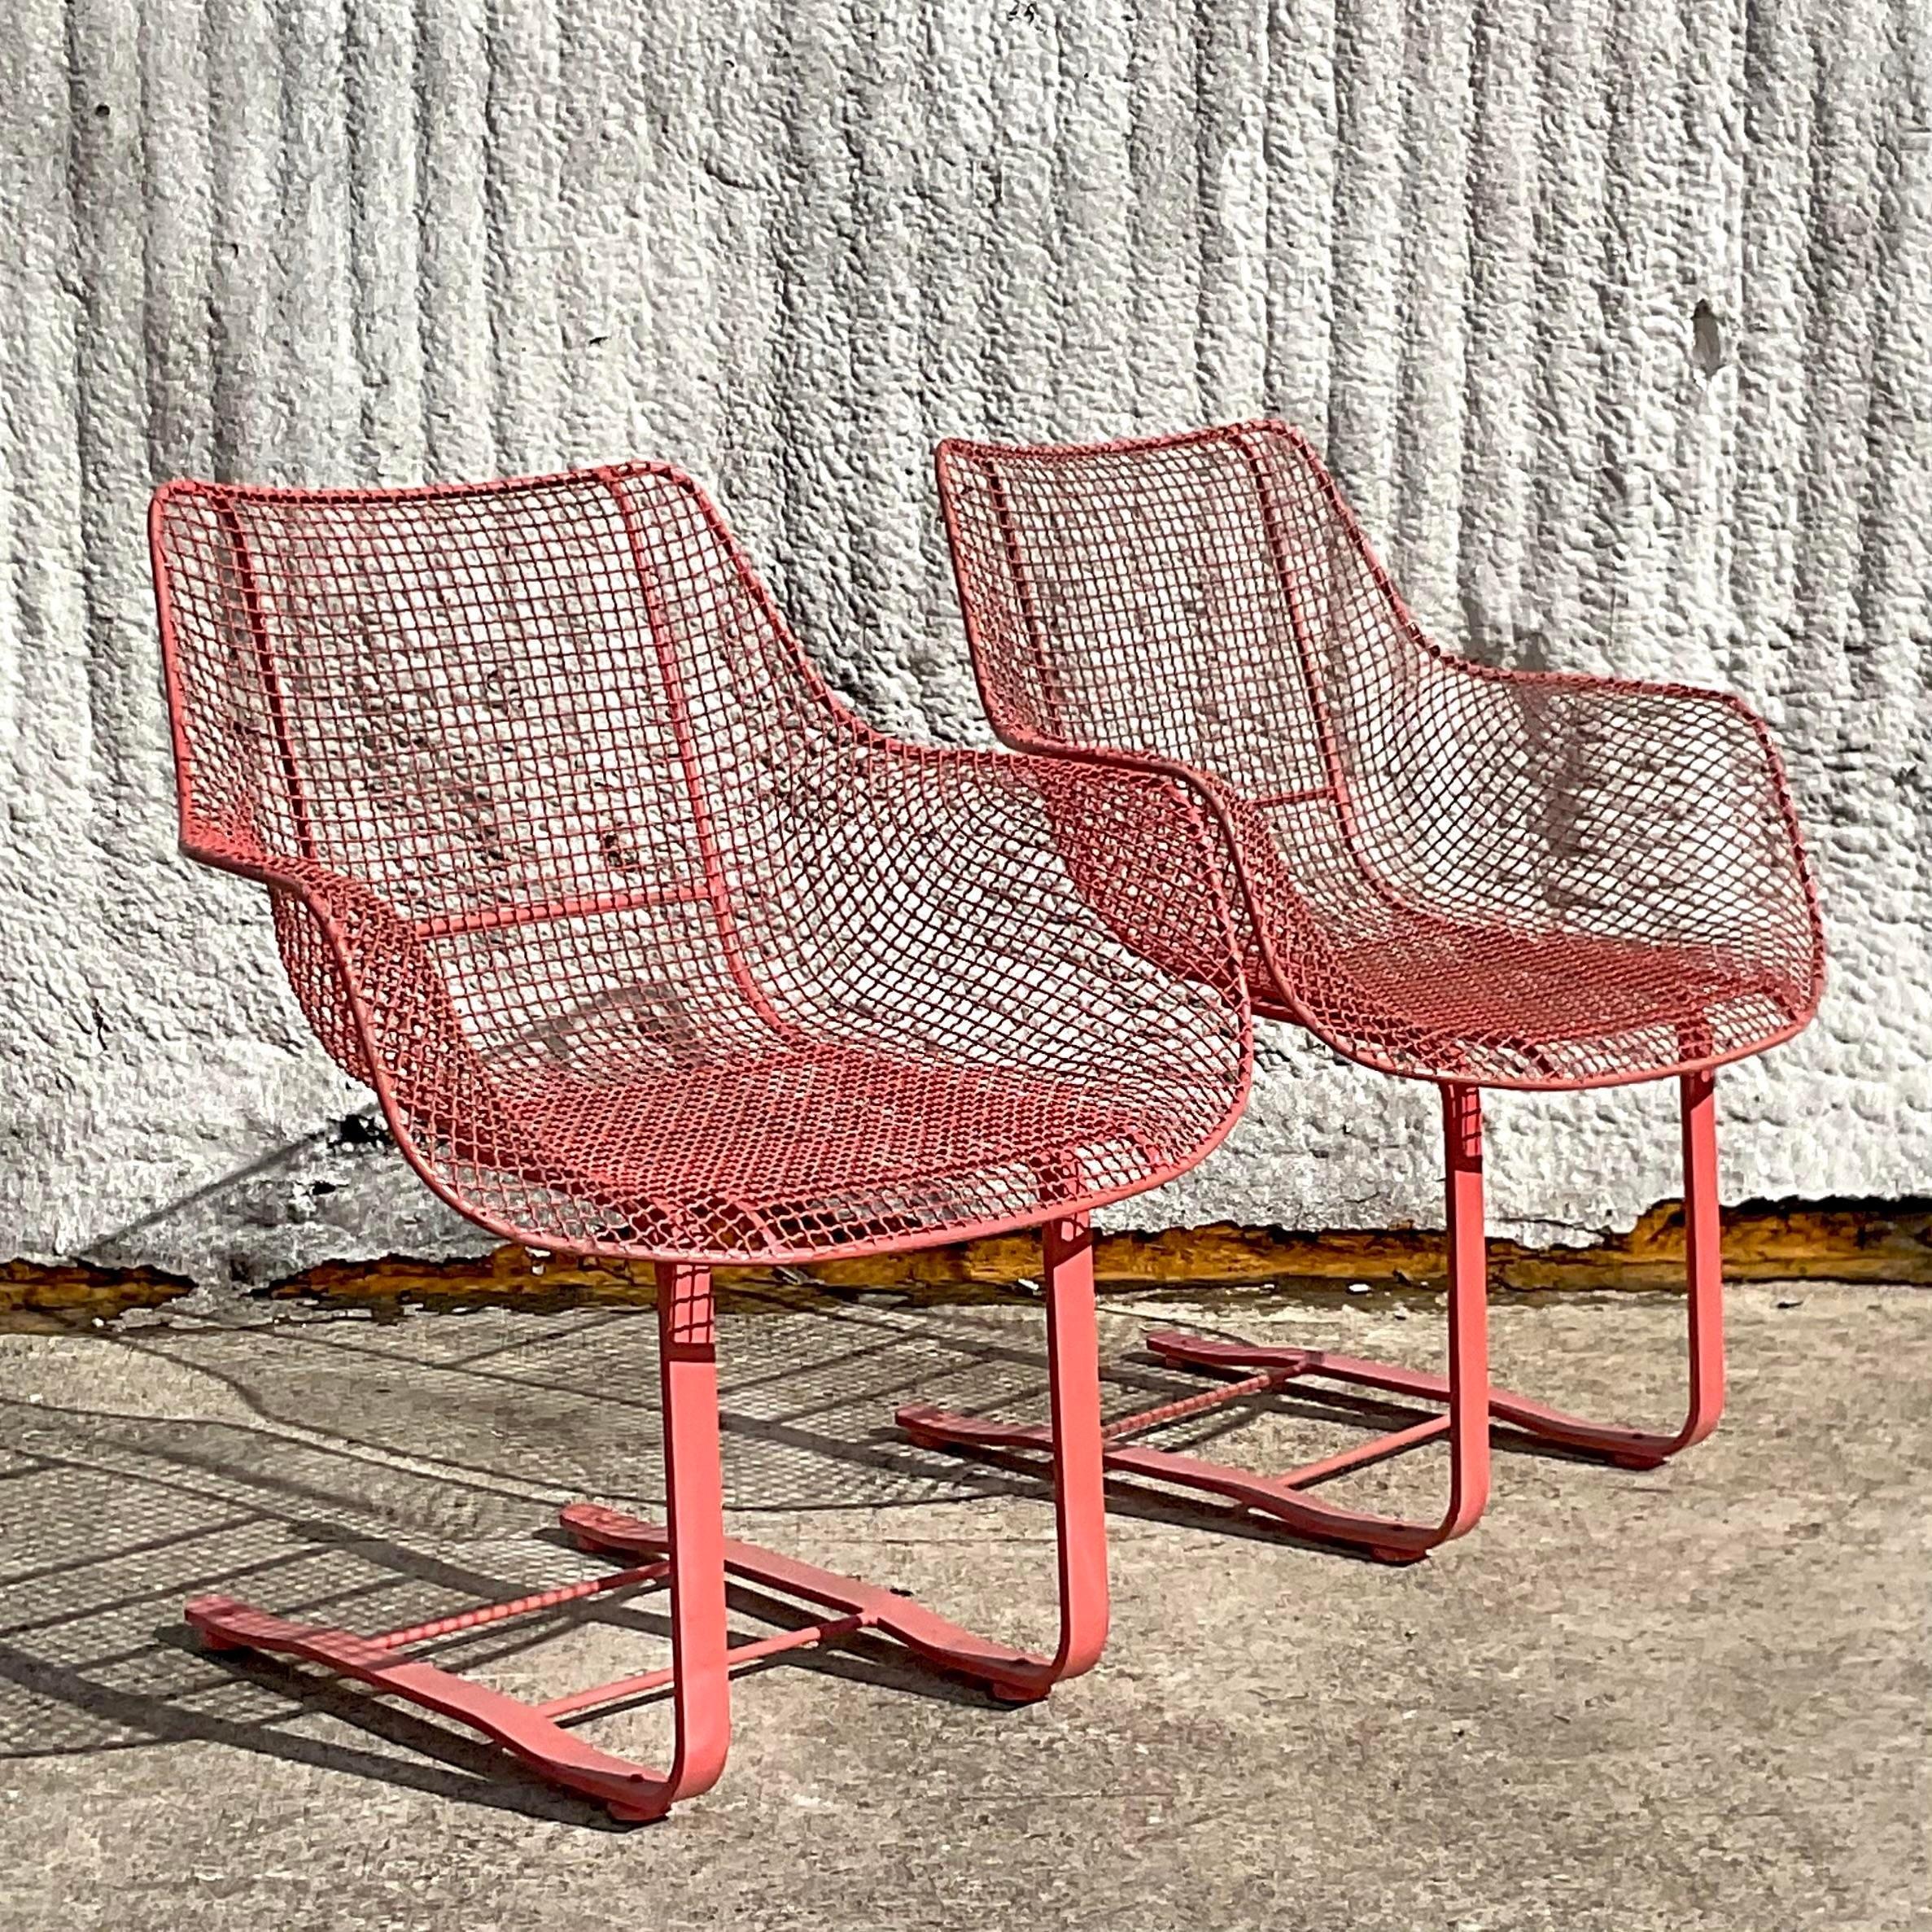 Vintage Mid-Century Modern Russell Woodard “Sculptura” Springer Chairs - a Pair For Sale 2